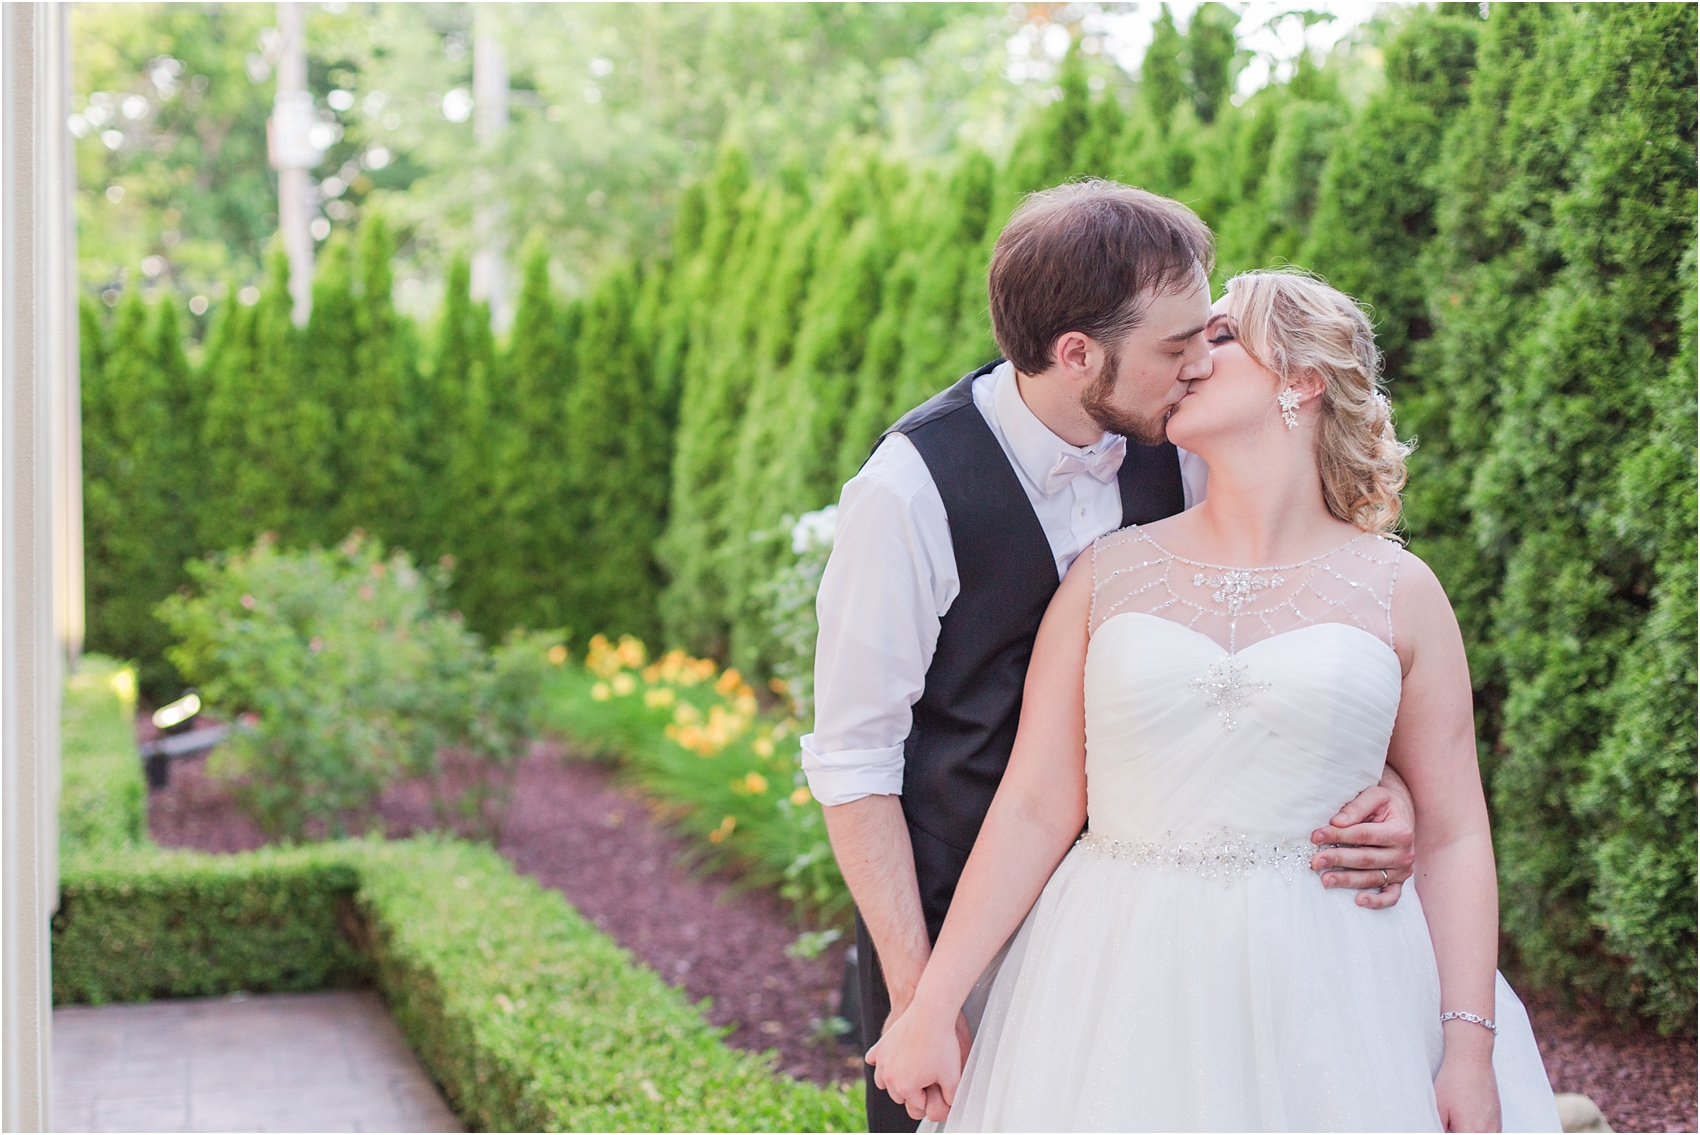 lord-of-the-rings-inspired-wedding-photos-at-crystal-gardens-in-howell-mi-by-courtney-carolyn-photography_0112.jpg